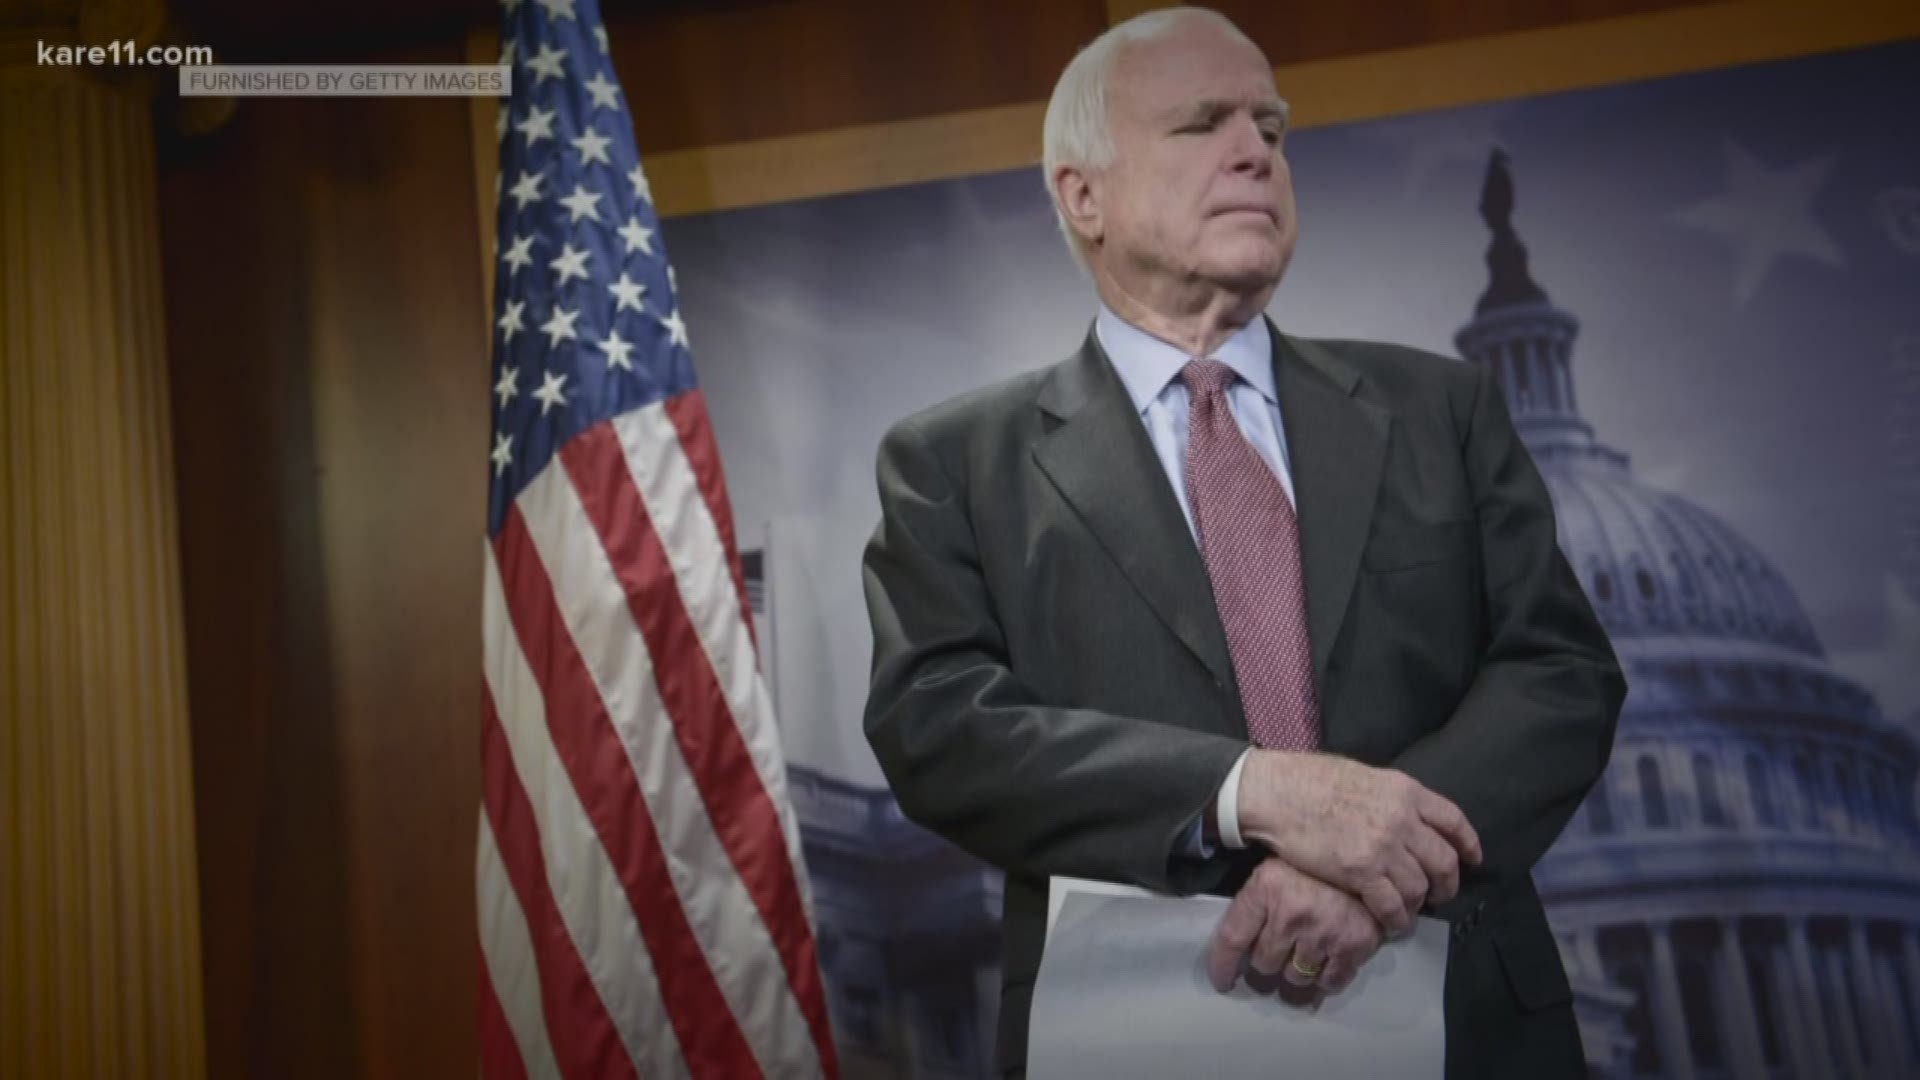 Senator John McCain died from Glioblastoma. It's one of the most aggressive, deadly forms of cancer. It's also very rare, even though it has ended the lives of some high-profile people. A top neurosurgeon told our Kent Erdahl there could be a good reason 